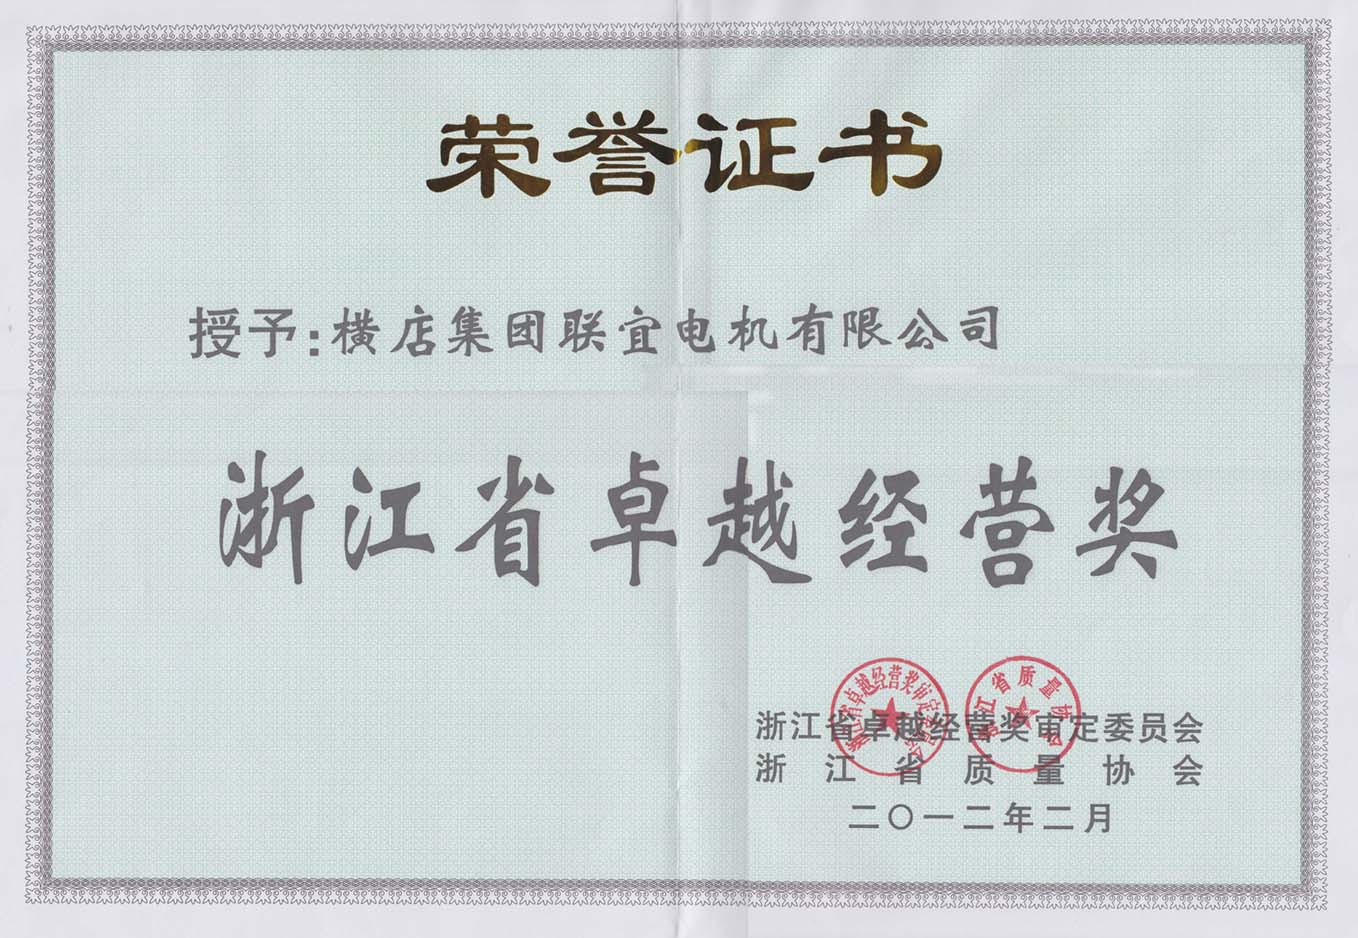 Honorary certificate of Zhejiang excellent management award